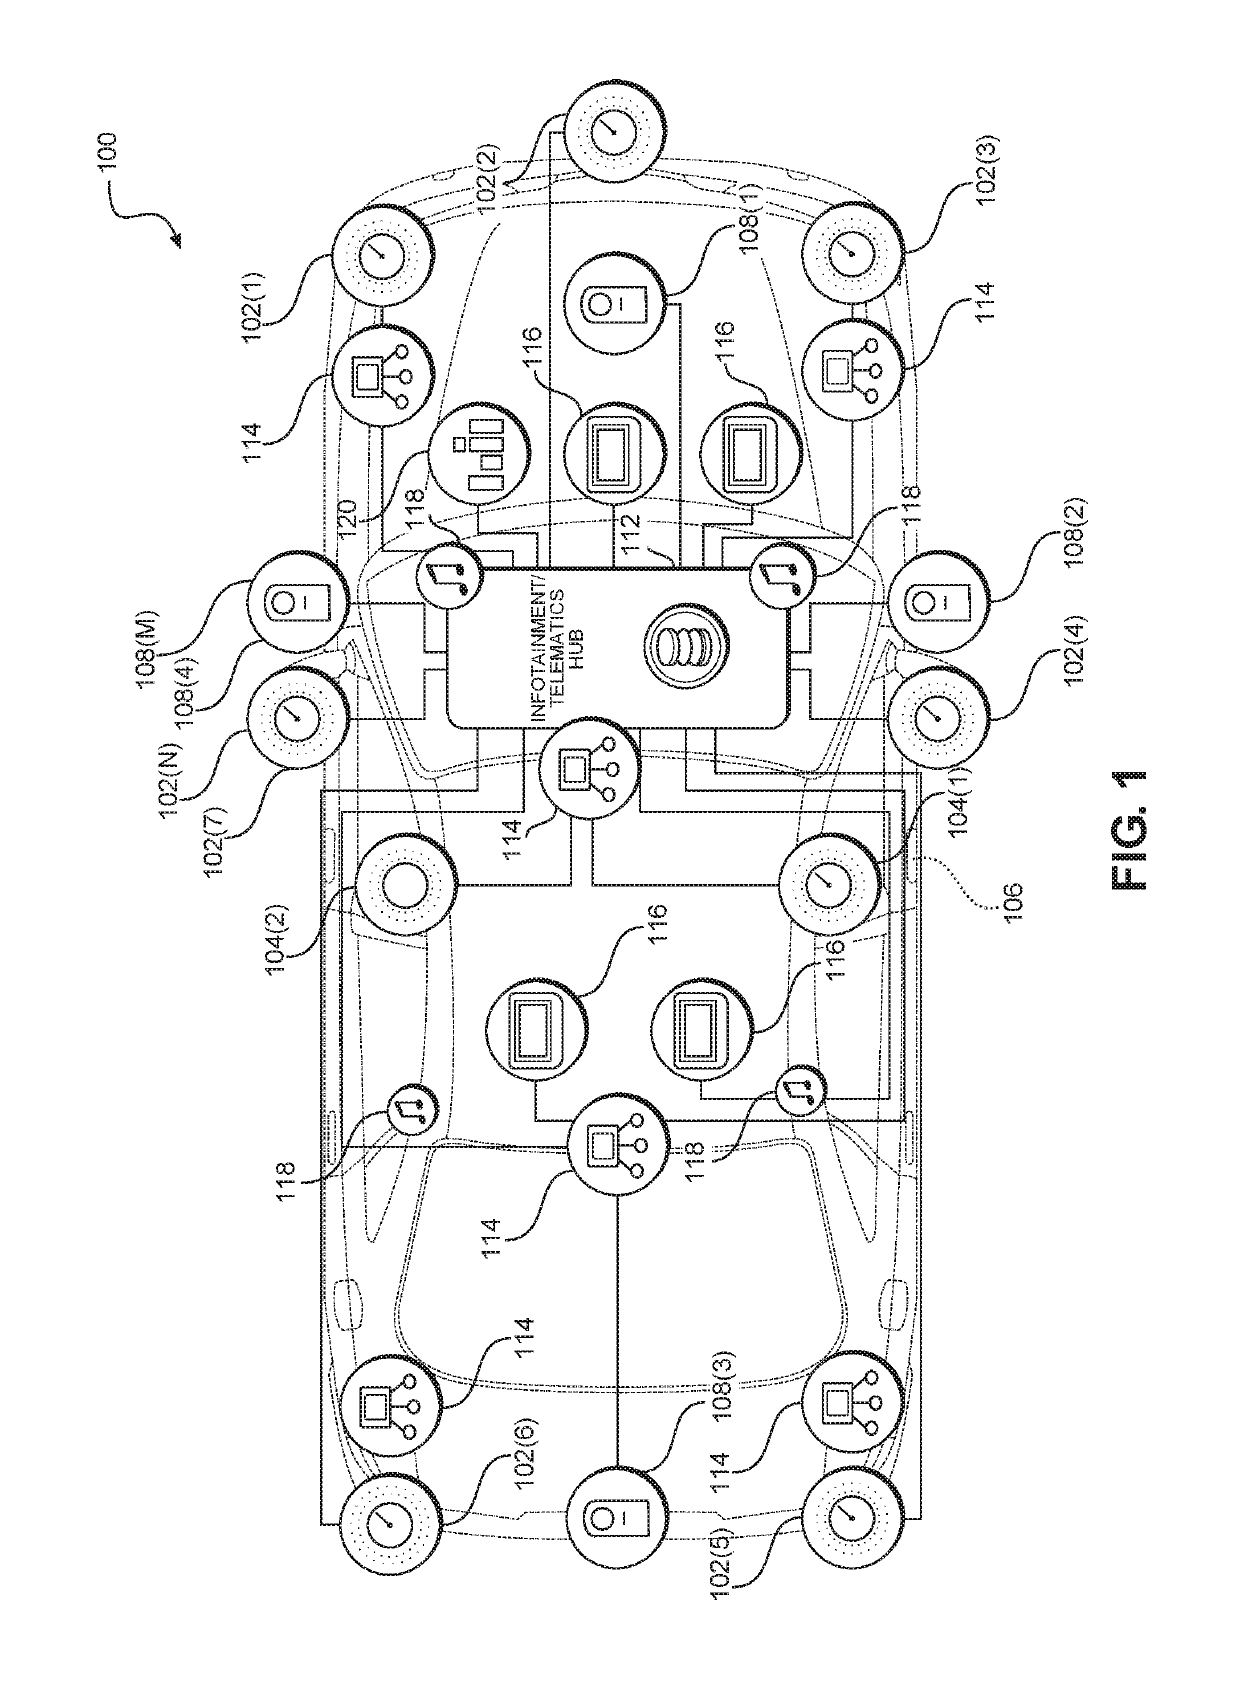 Methods and systems to broadcast sensor outputs in an automotive environment